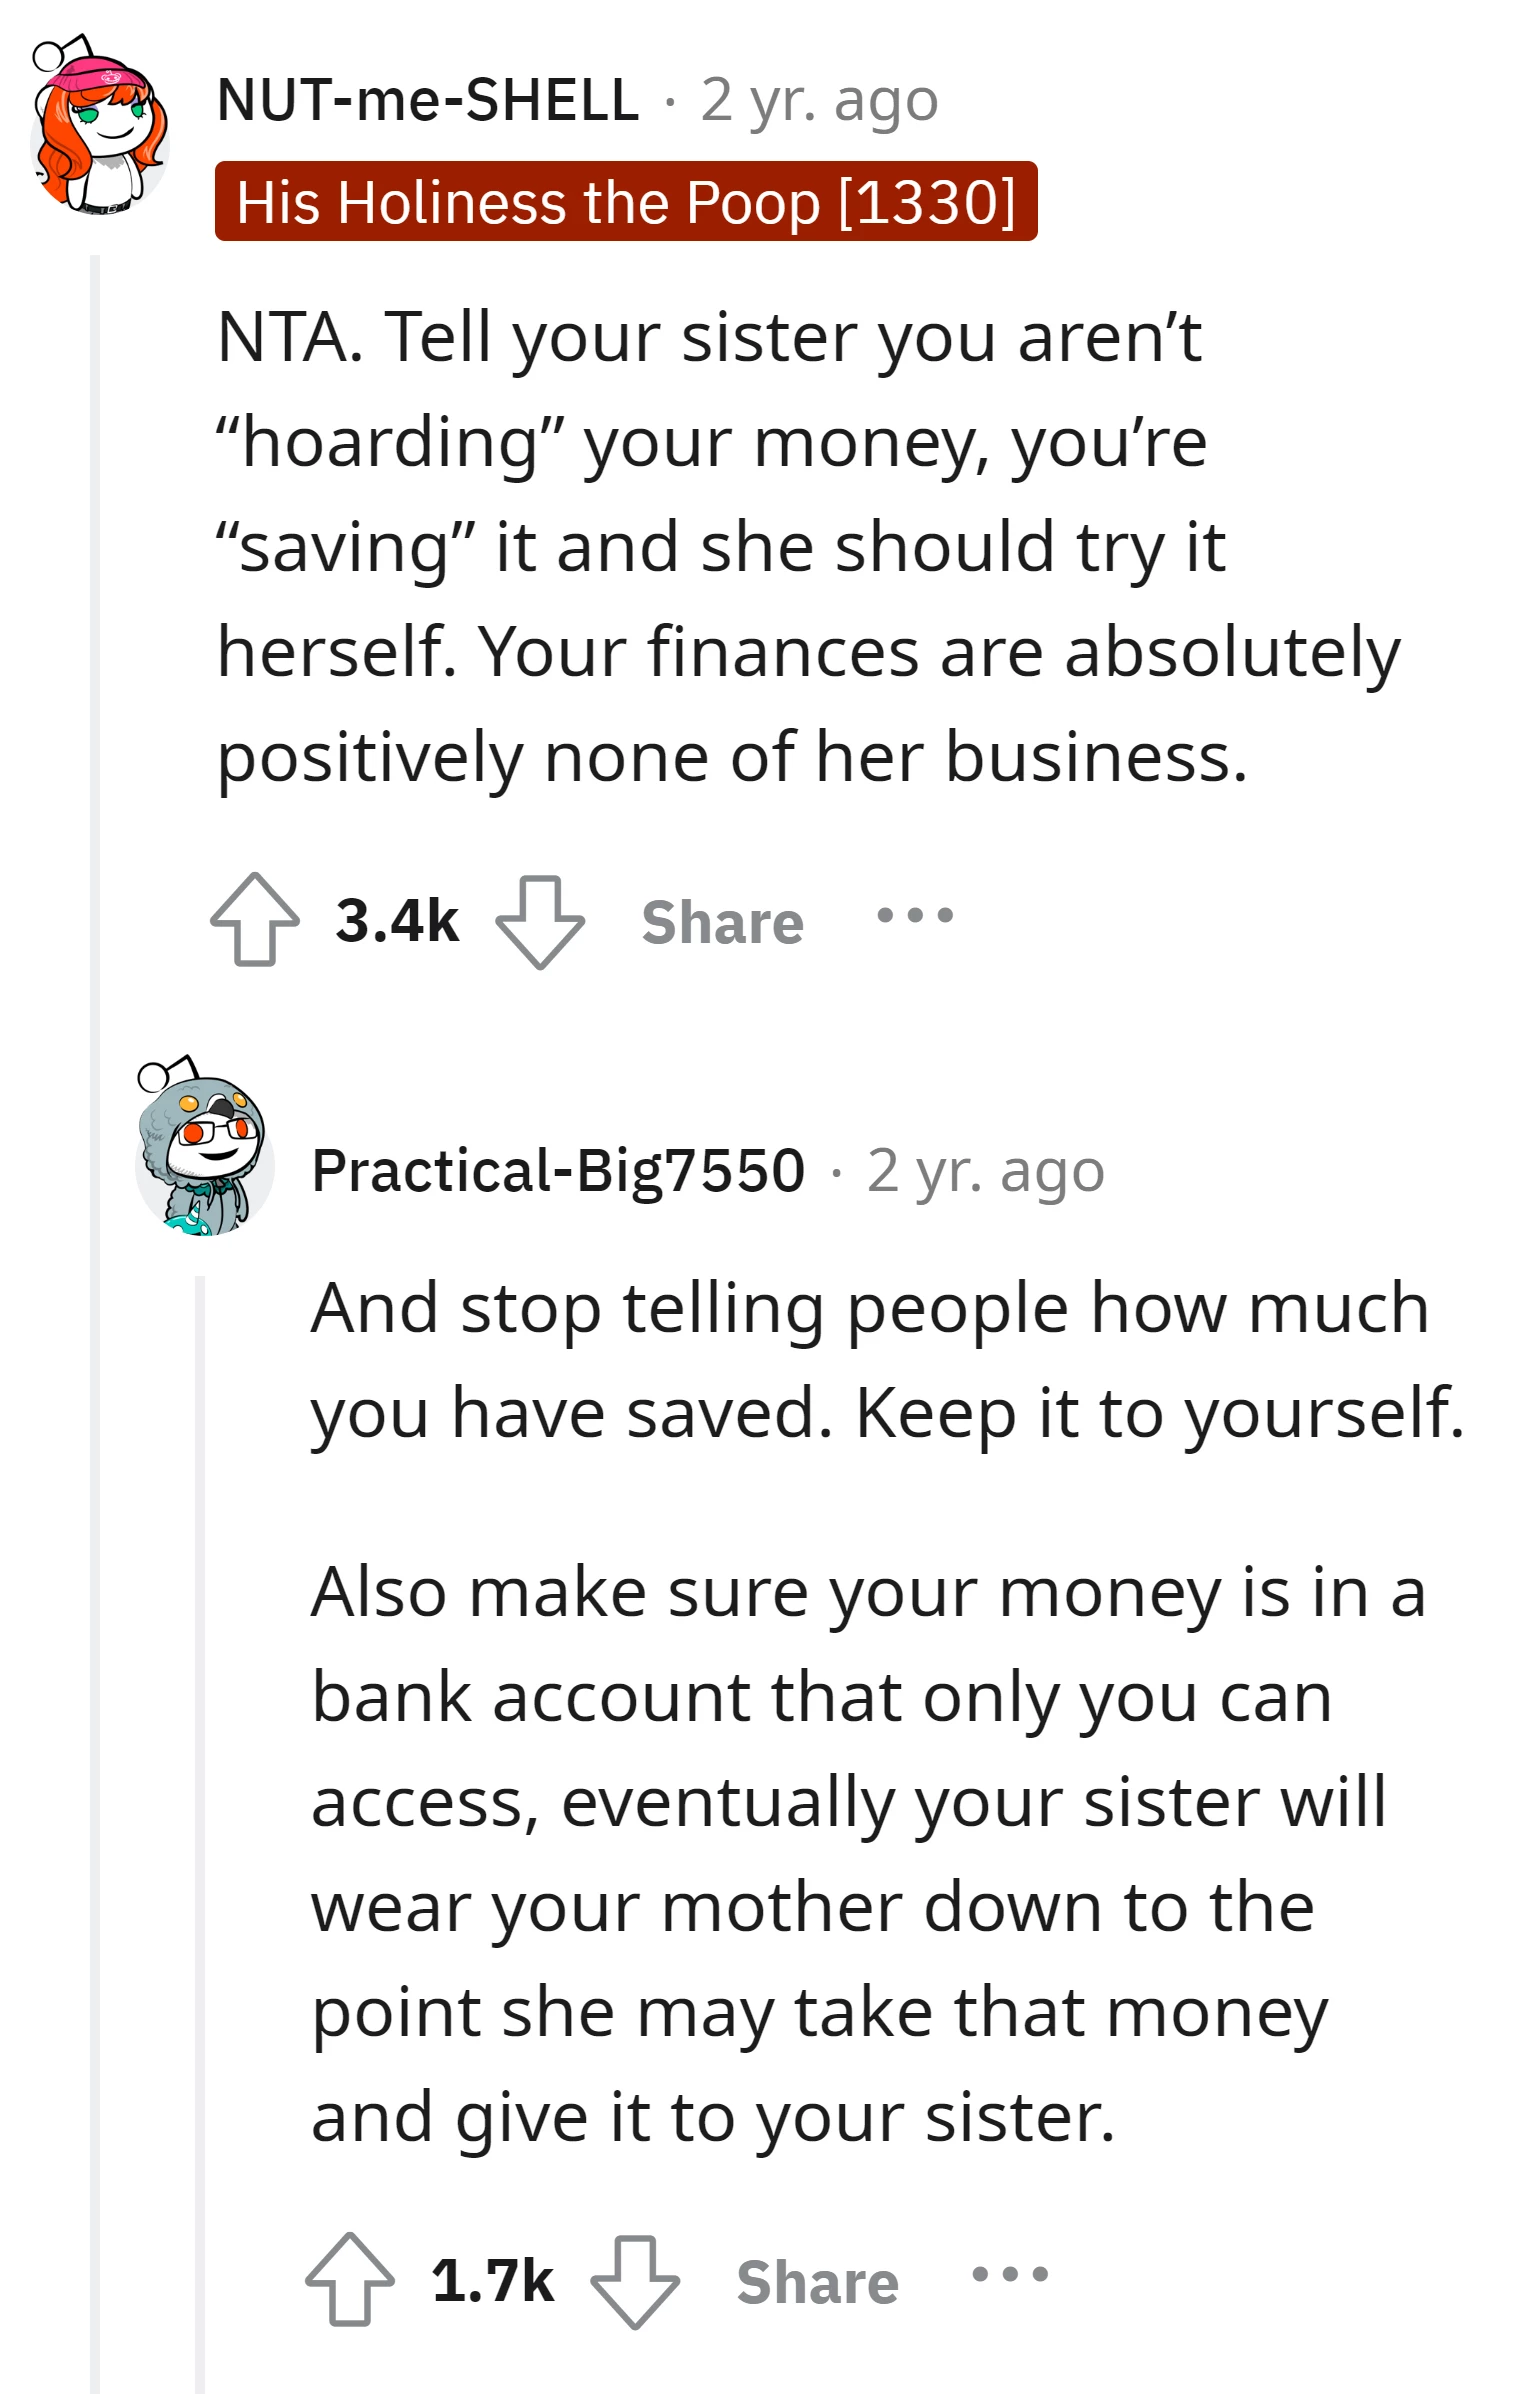 You should refrain from sharing your savings with your sister